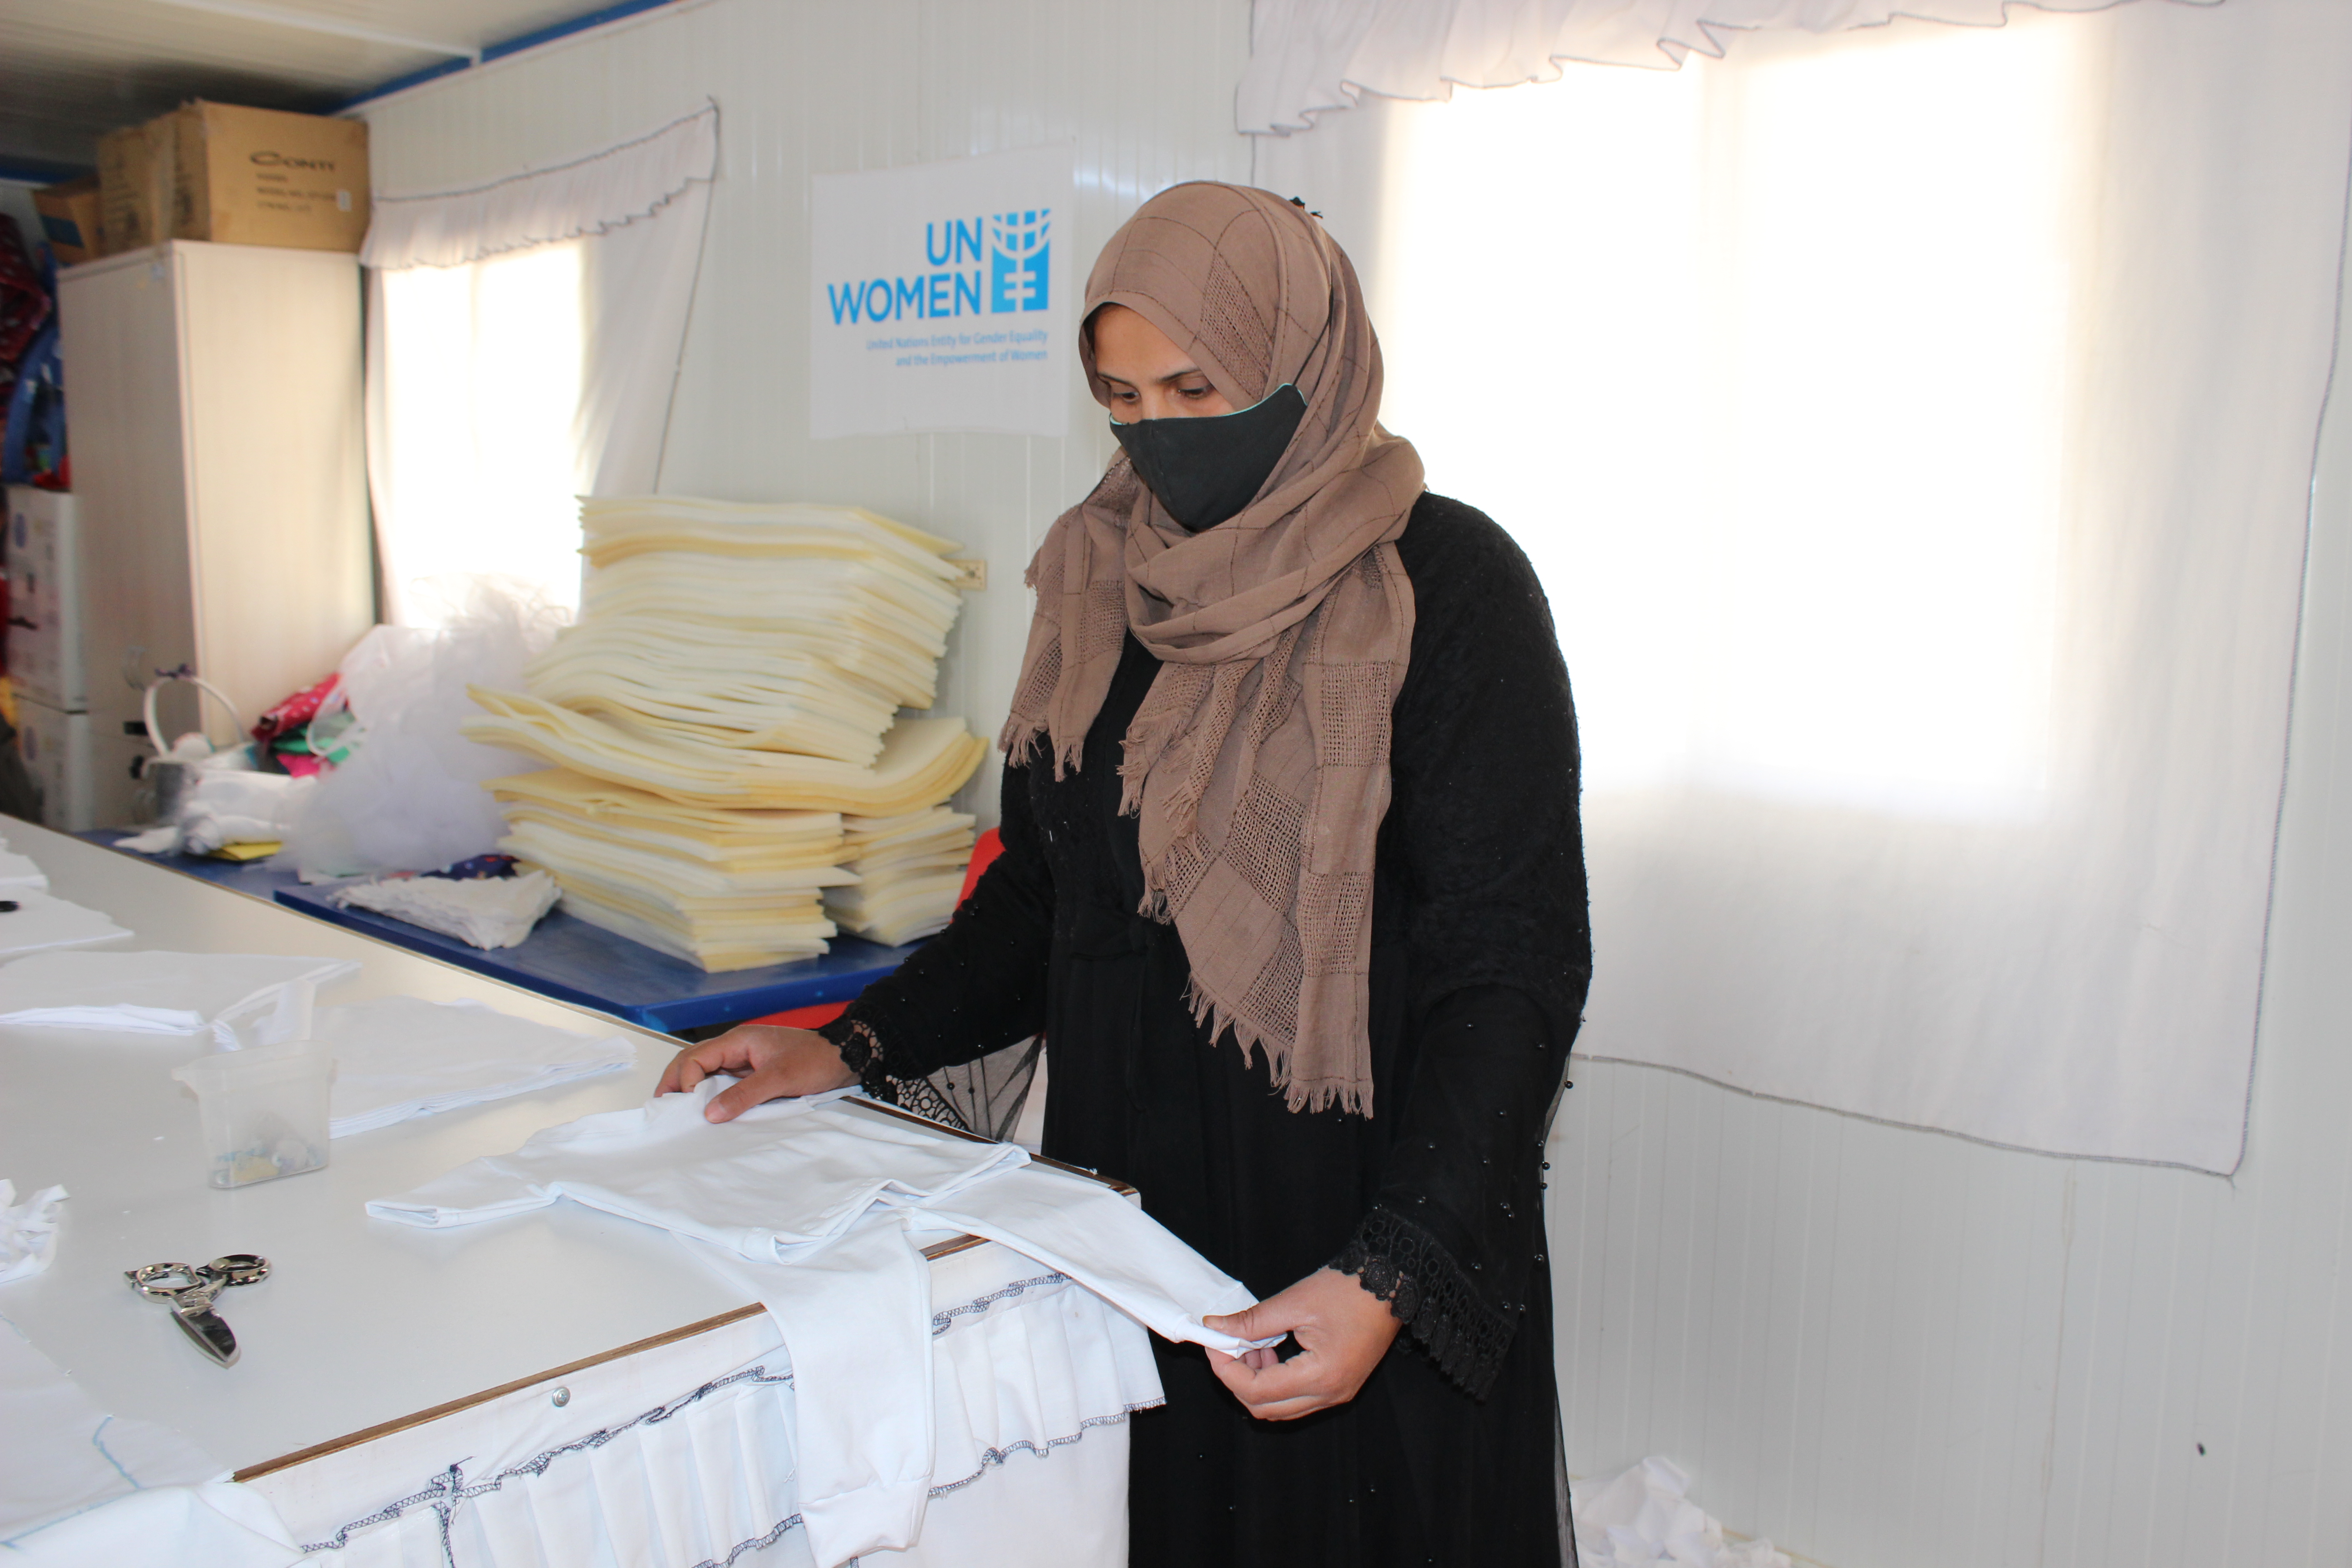 Nofa Ali Shadeh, 33, works on a baby suits at the UN Women Oasis center in the Azraq refugee camp. Photo: UN Women/Yeji Lee